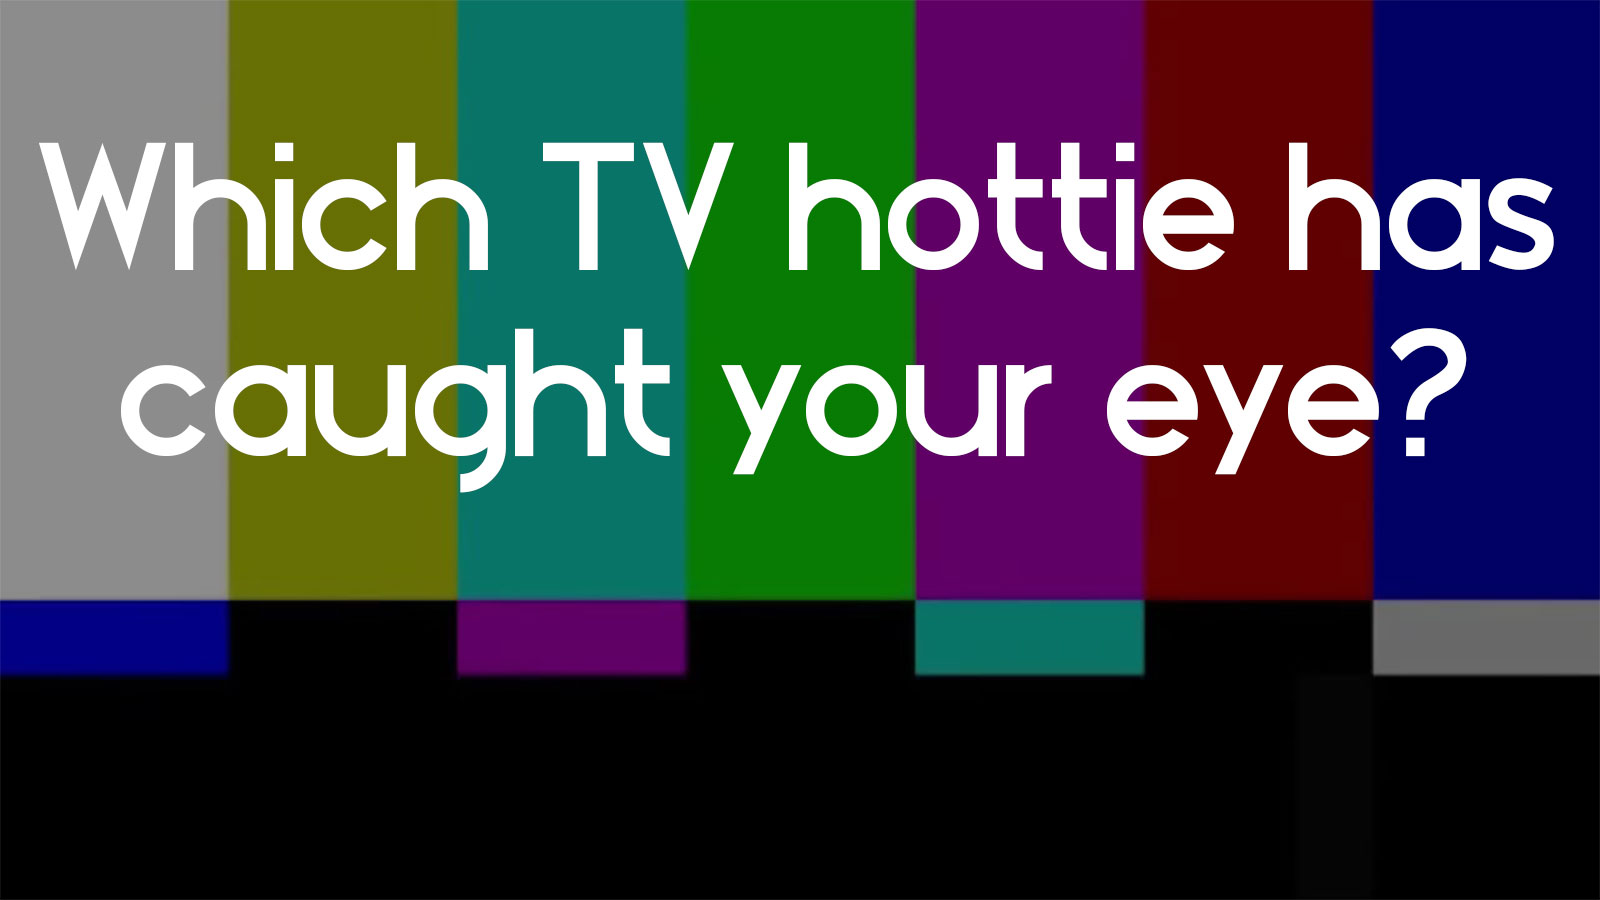 Can We Guess Your Age by Your Taste in TV? Q64